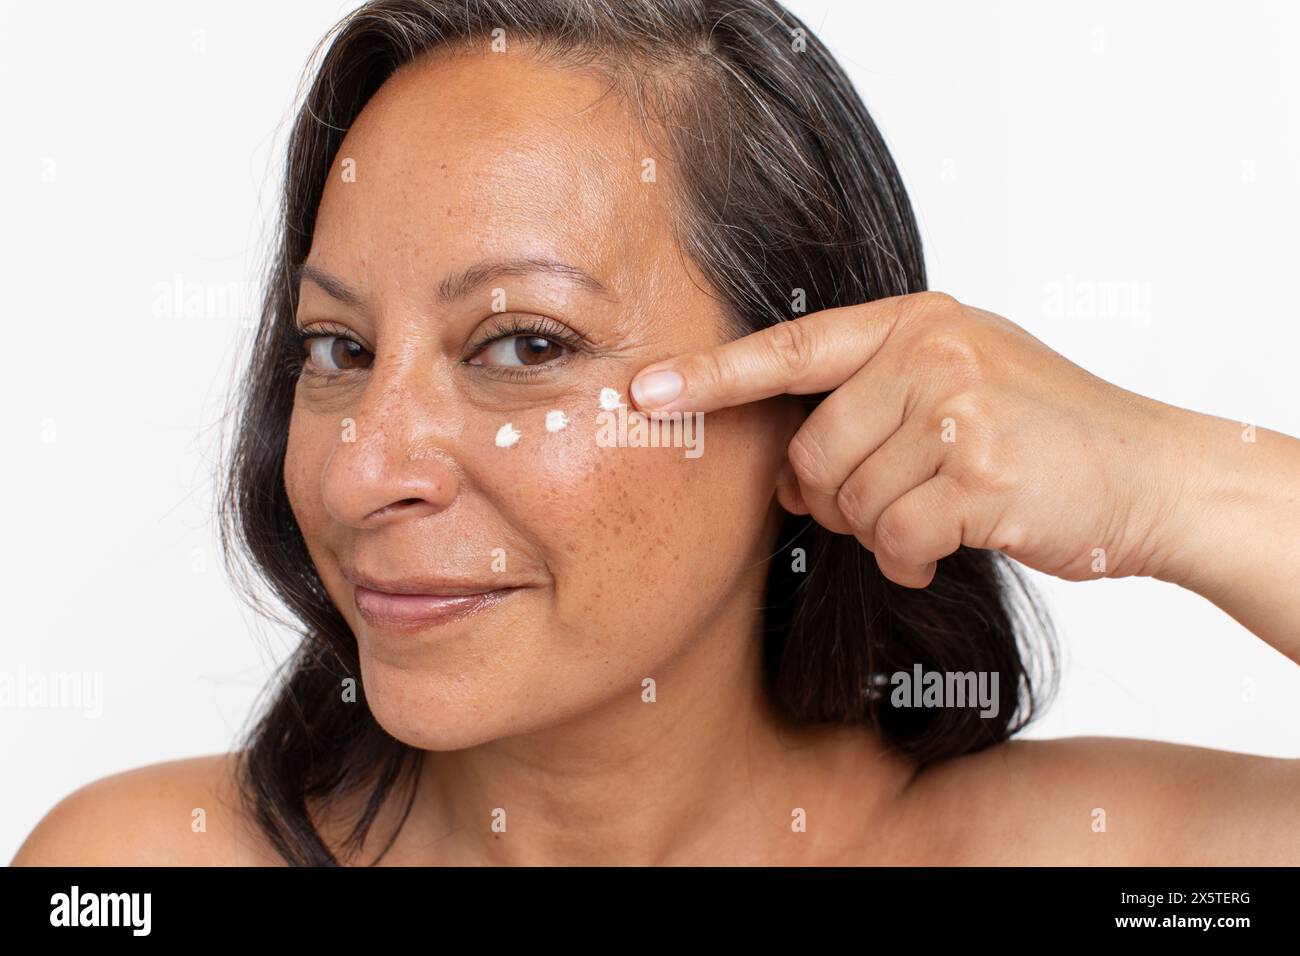 Studio portrait of smiling woman with dots of eye cream Stock Photo